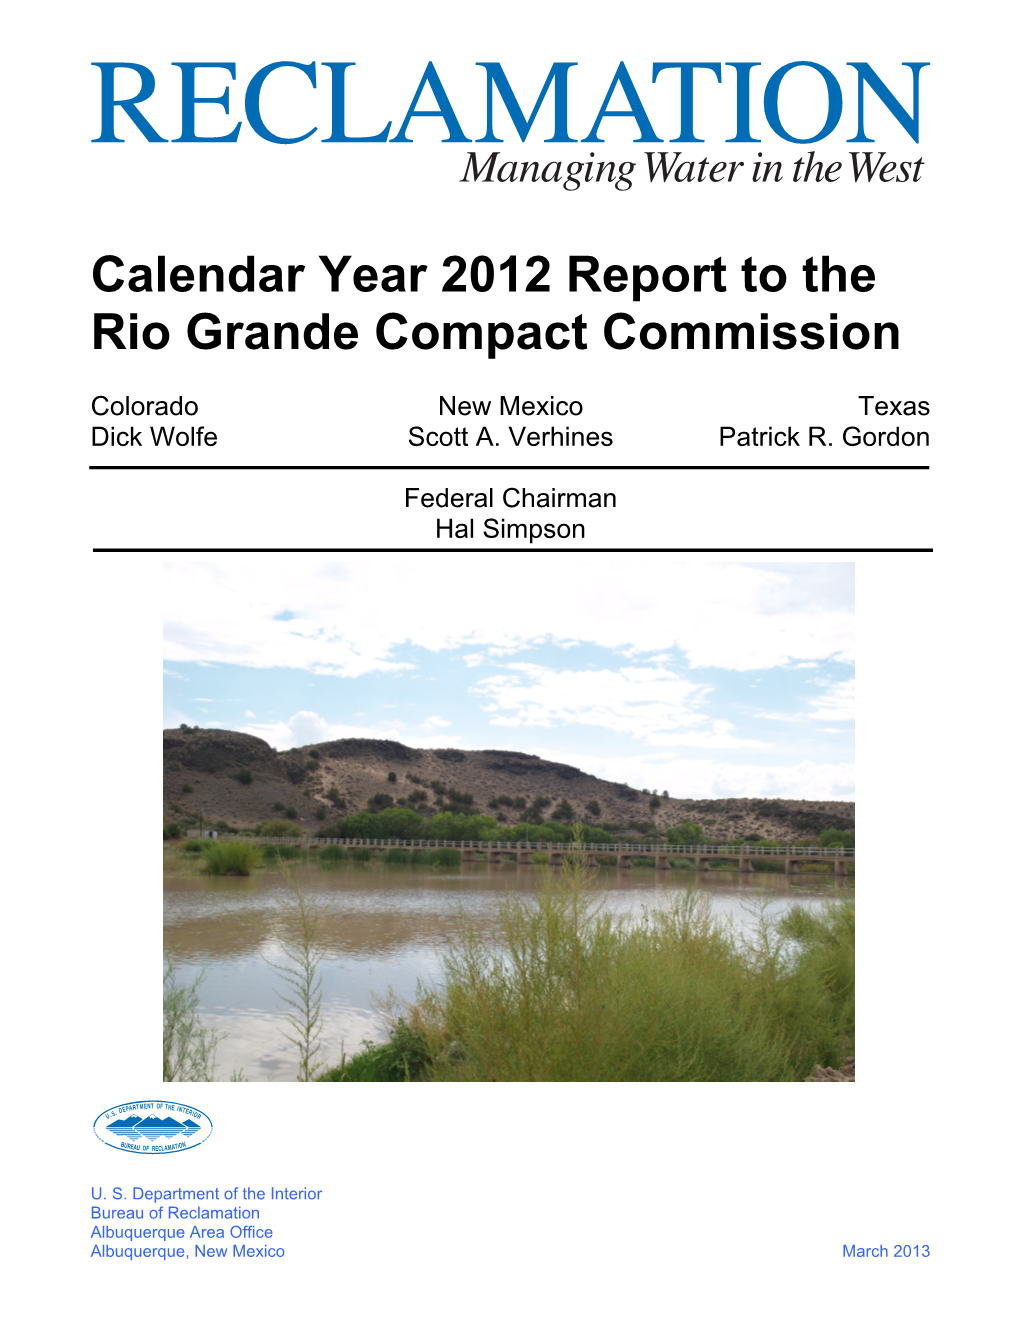 Calendar Year 2012 Report to the Rio Grande Compact Commission